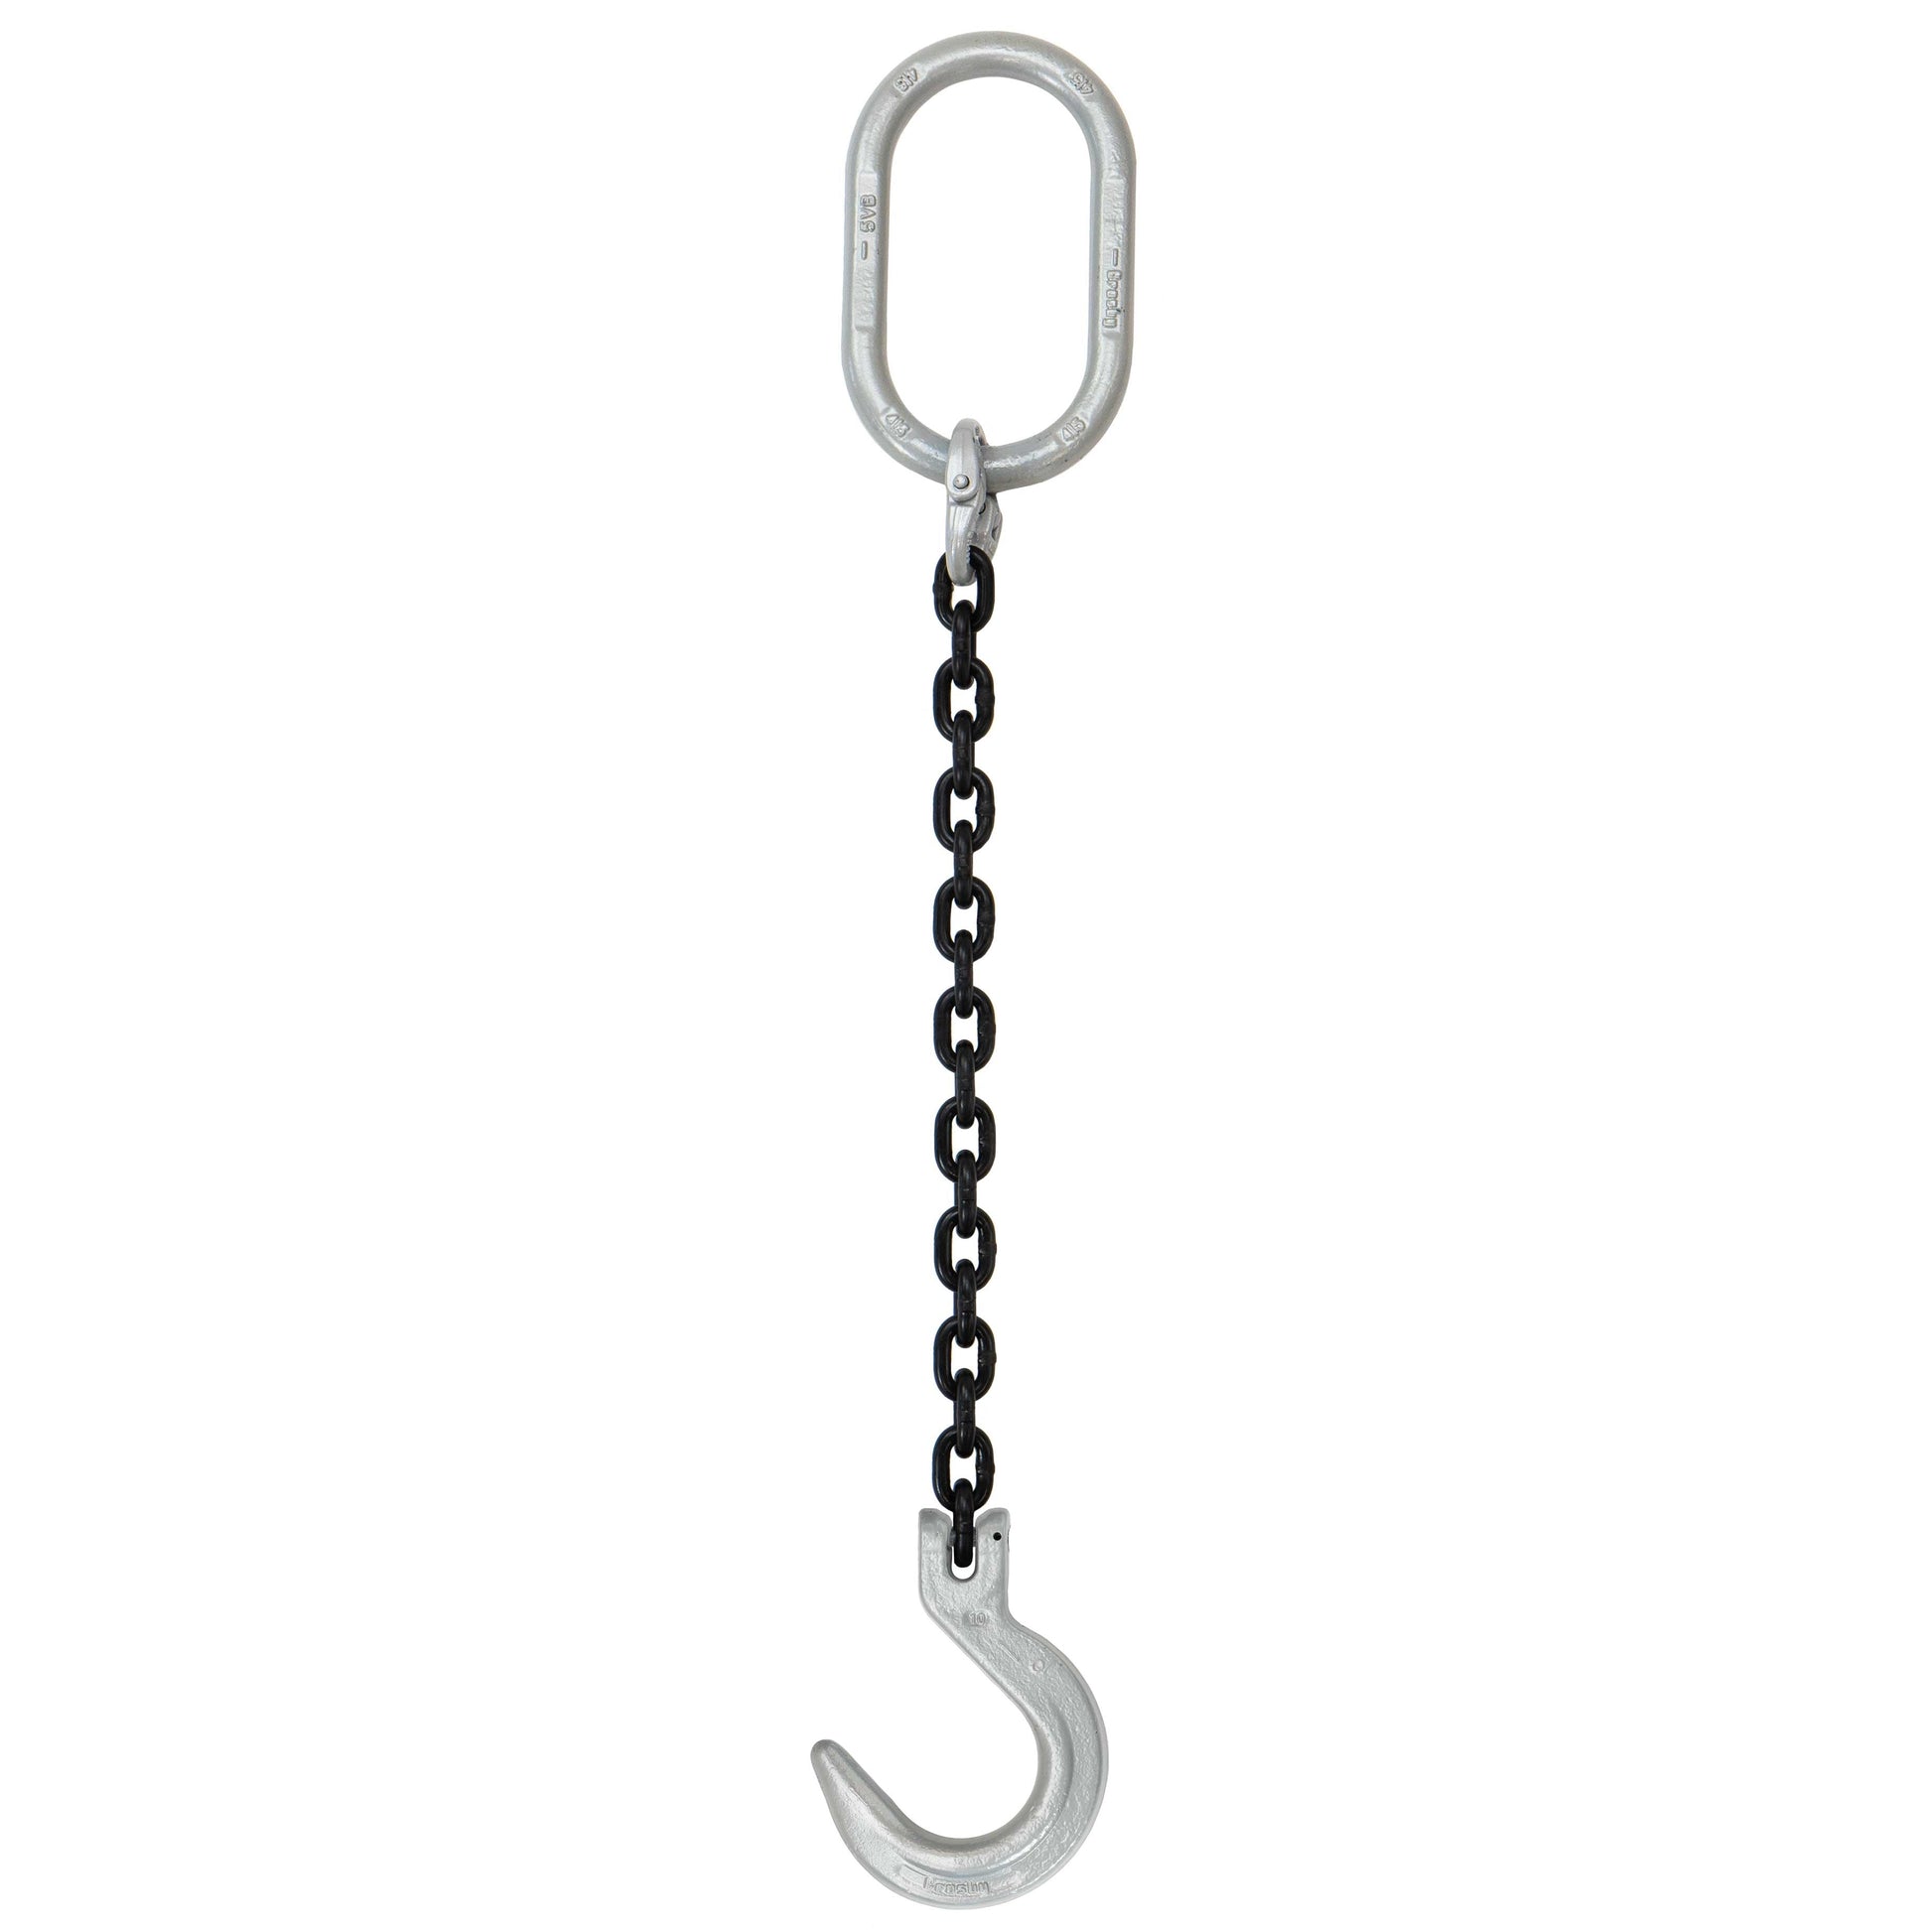 12 inch x 20 foot Domestic Single Leg Chain Sling w Crosby Foundry Hook Grade 100 image 1 of 2